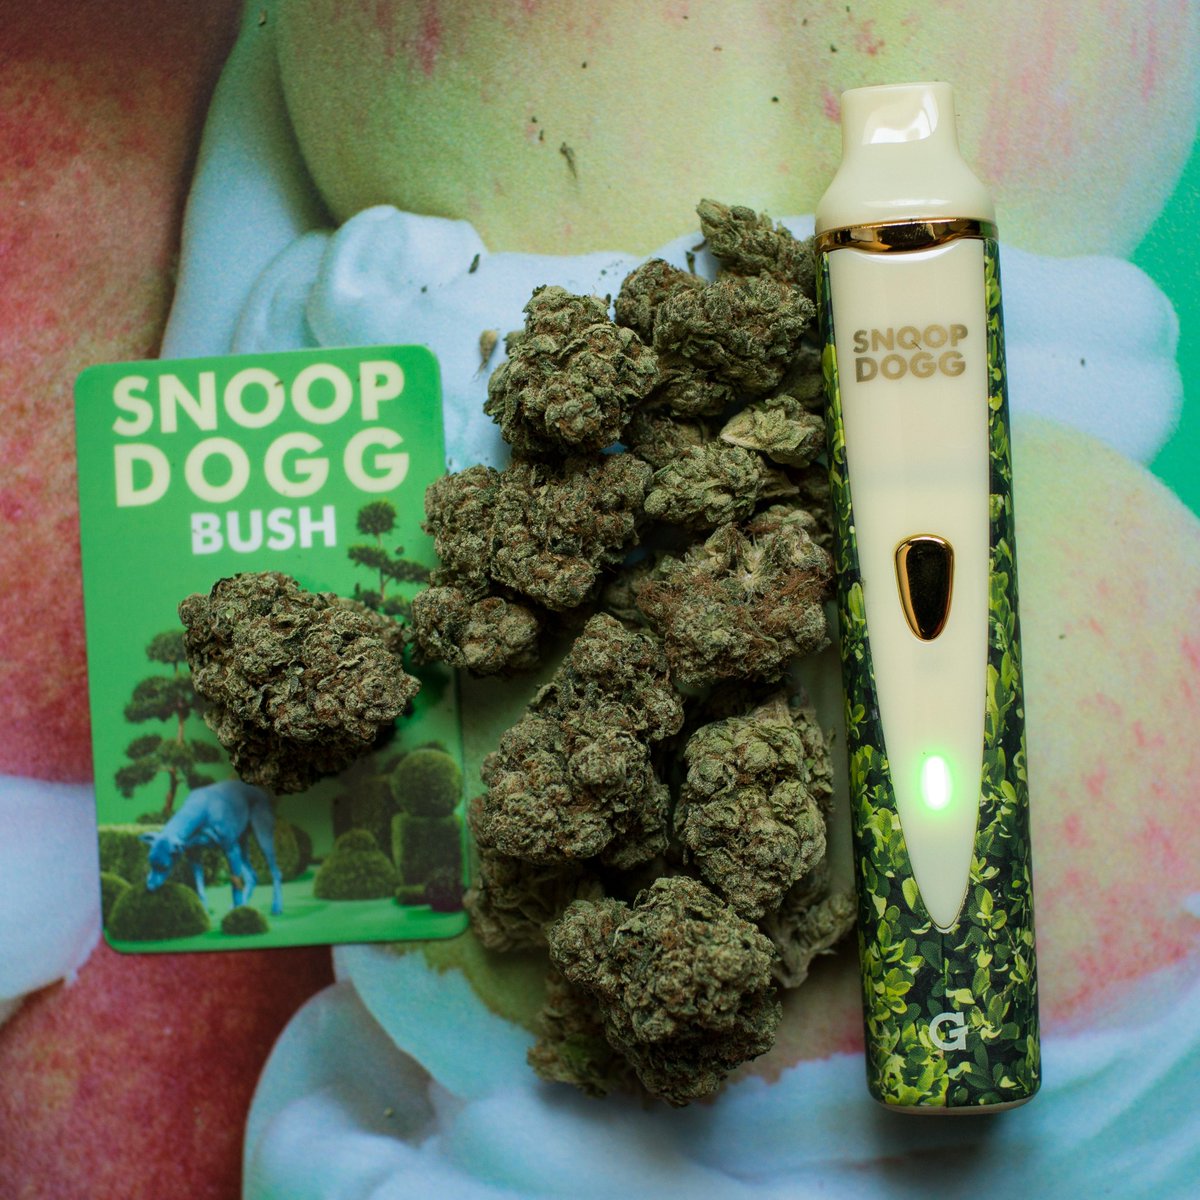 #puffpuffpasstuesdays get ur #BUSHedition @GPen #gpro wit a free dl of my album #BUSH at http://t.co/GiJYhF0gXK ! http://t.co/9J8wl0jw9Q